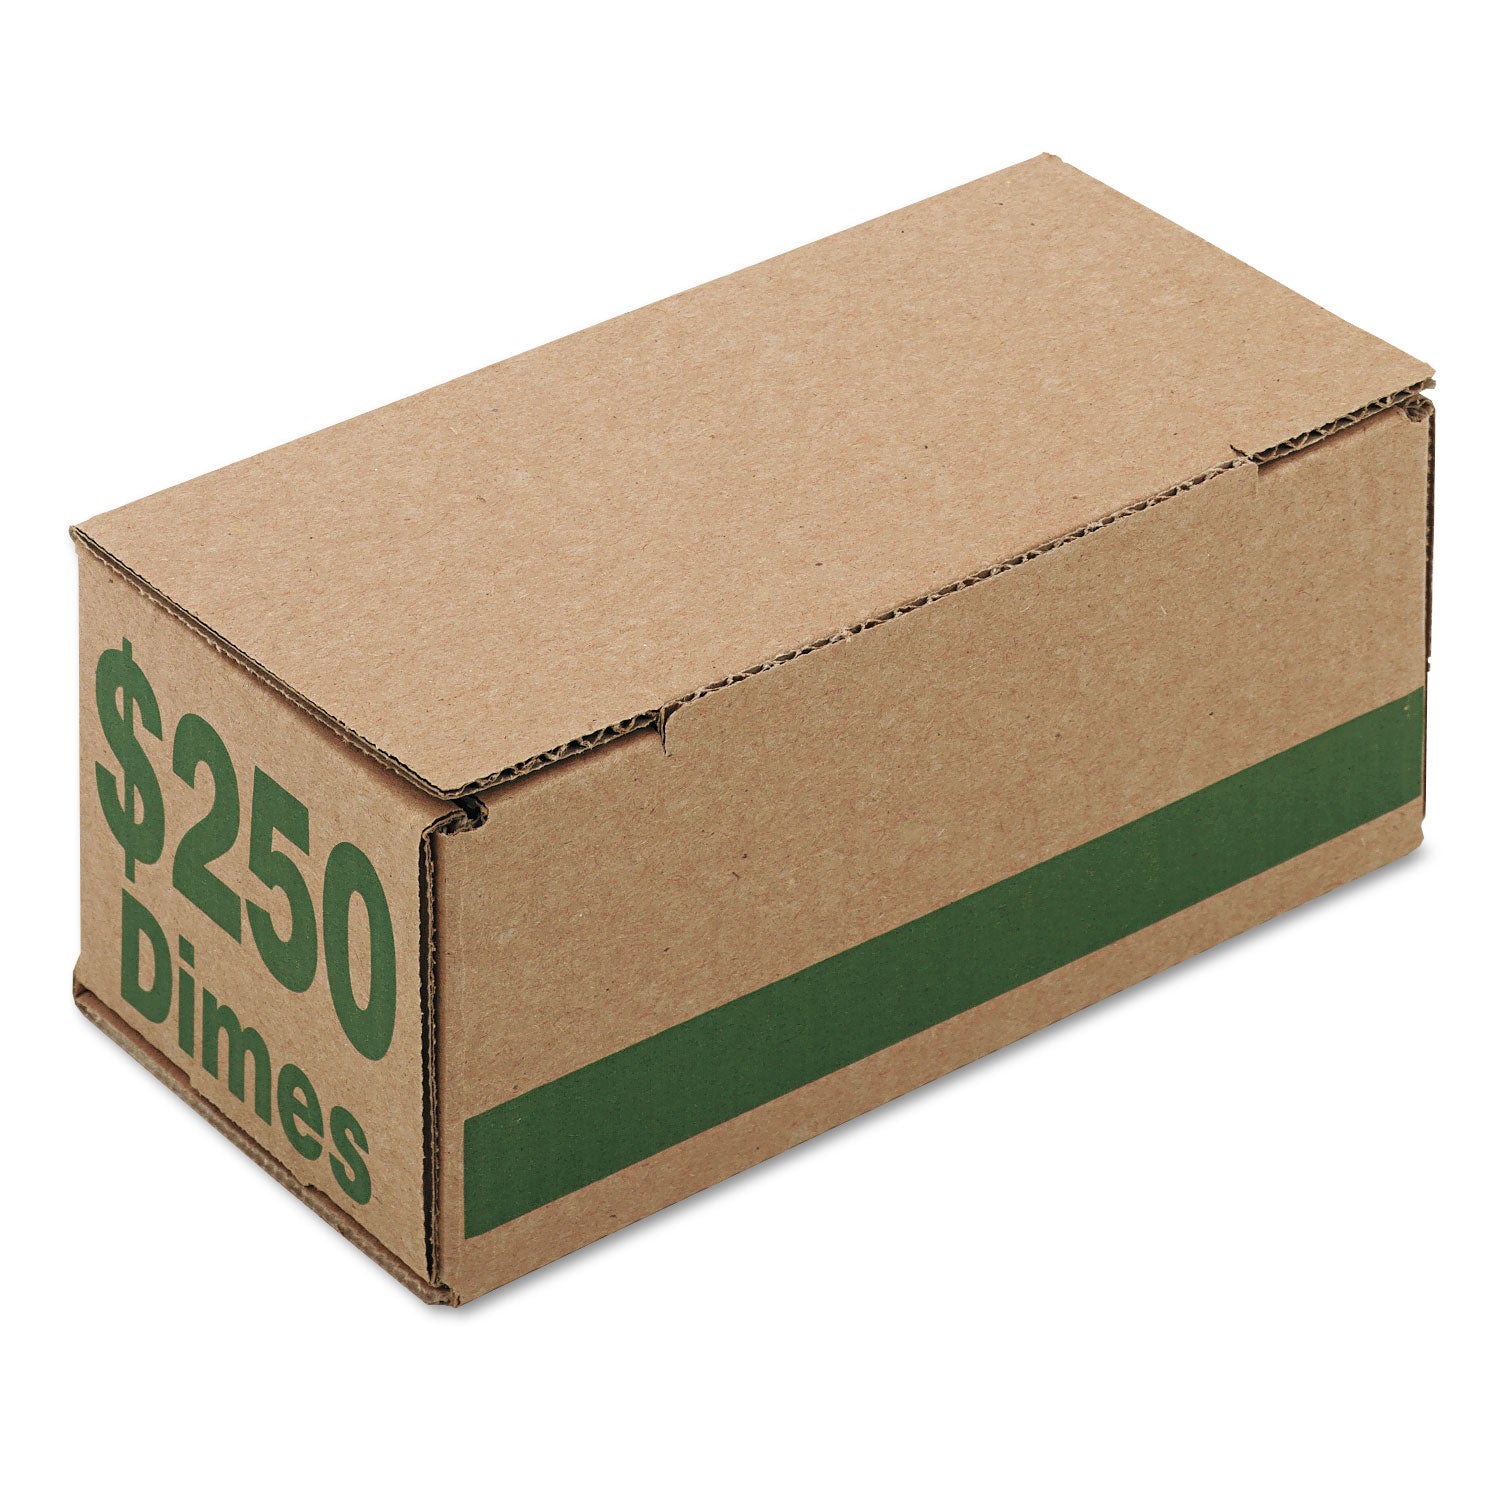 corrugated-cardboard-coin-storage-with-denomination-printed-on-side-806-x-331-x-319-green_icx94190088 - 1